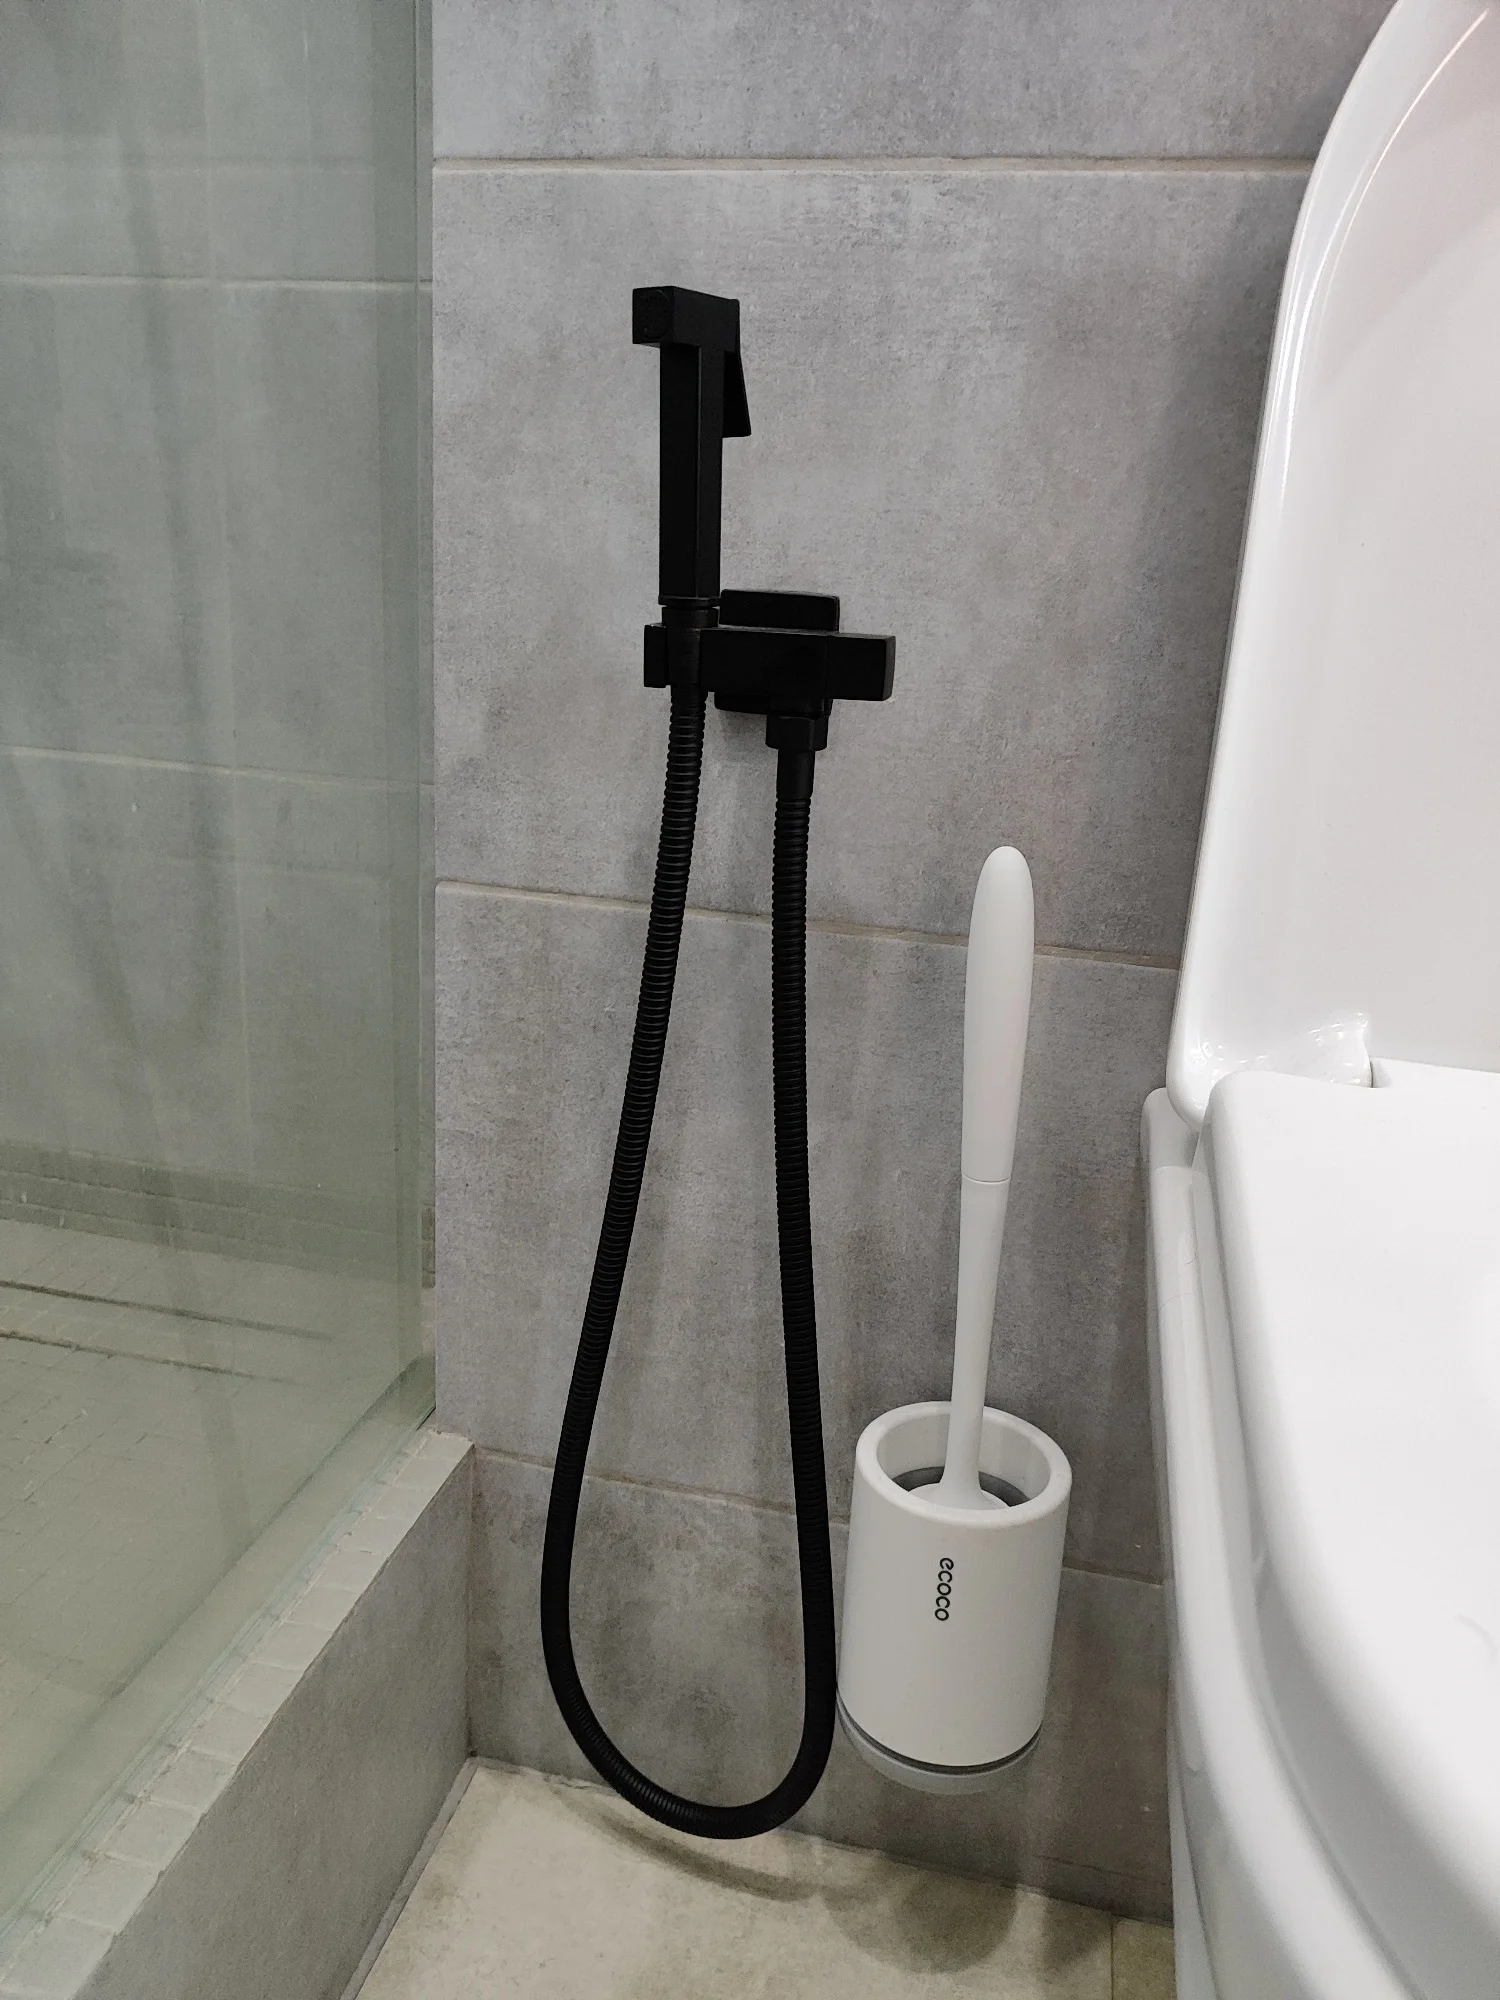 ULA Brass Bidet Faucet: Single Cold Water Tap with Handheld Spray Shower Set for Hygienic Cleaning - Black photo review